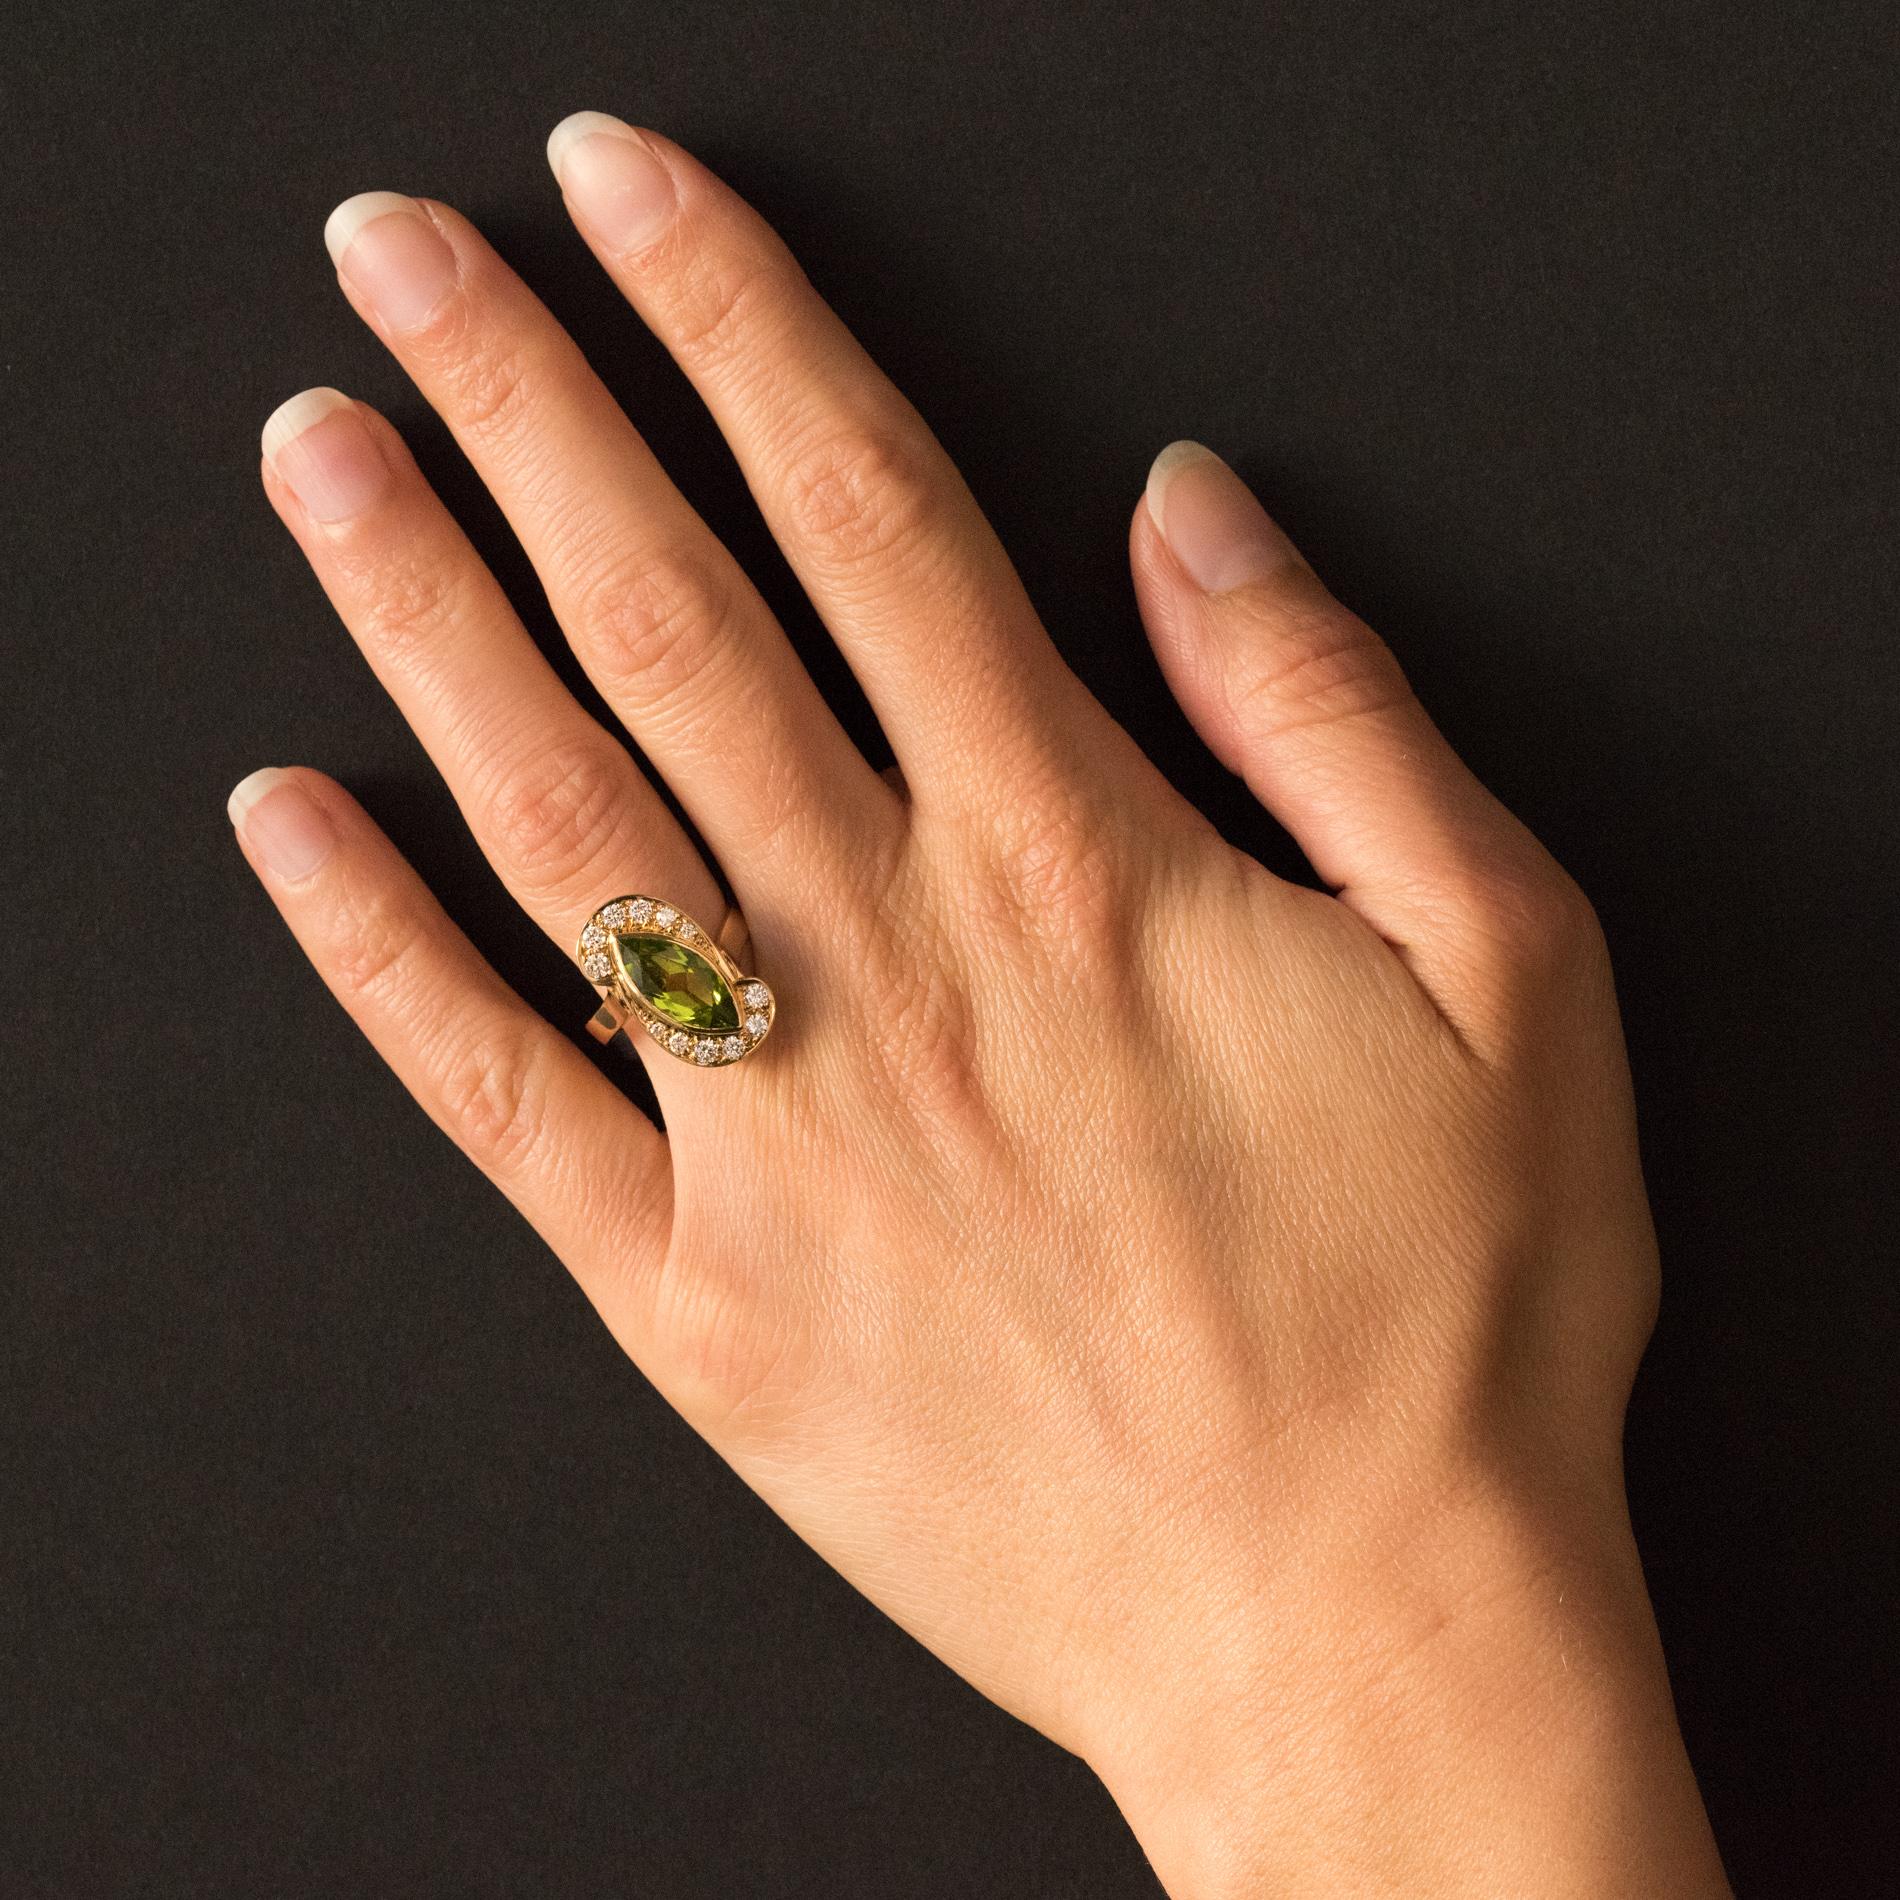 Ring in 18 karats yellow gold, eagle's head hallmark.
This astonishing retro ring features a sleek basket on which are set a shuttle- cut peridot surrounded by 12 brilliant-cut modern-grain diamonds. Geometric openings allow the light to penetrate